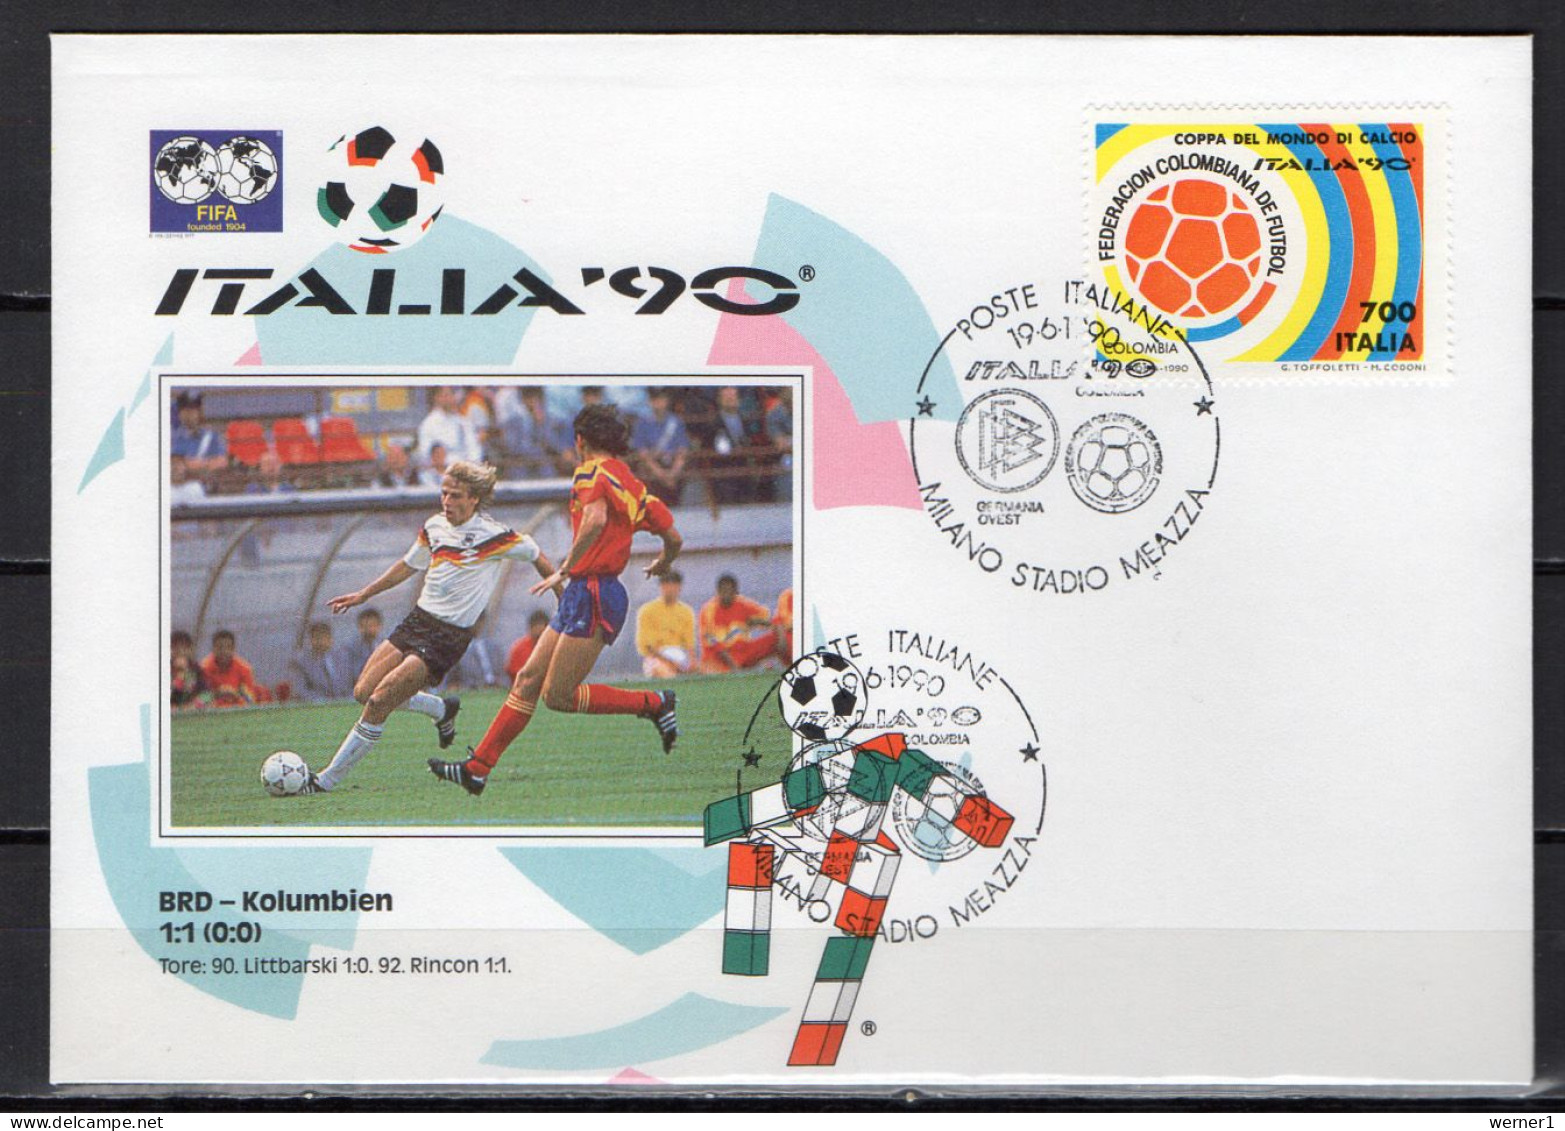 Italy 1990 Football Soccer World Cup Commemorative Cover Final Match Germany - Colombia 1 : 1 - 1990 – Italië